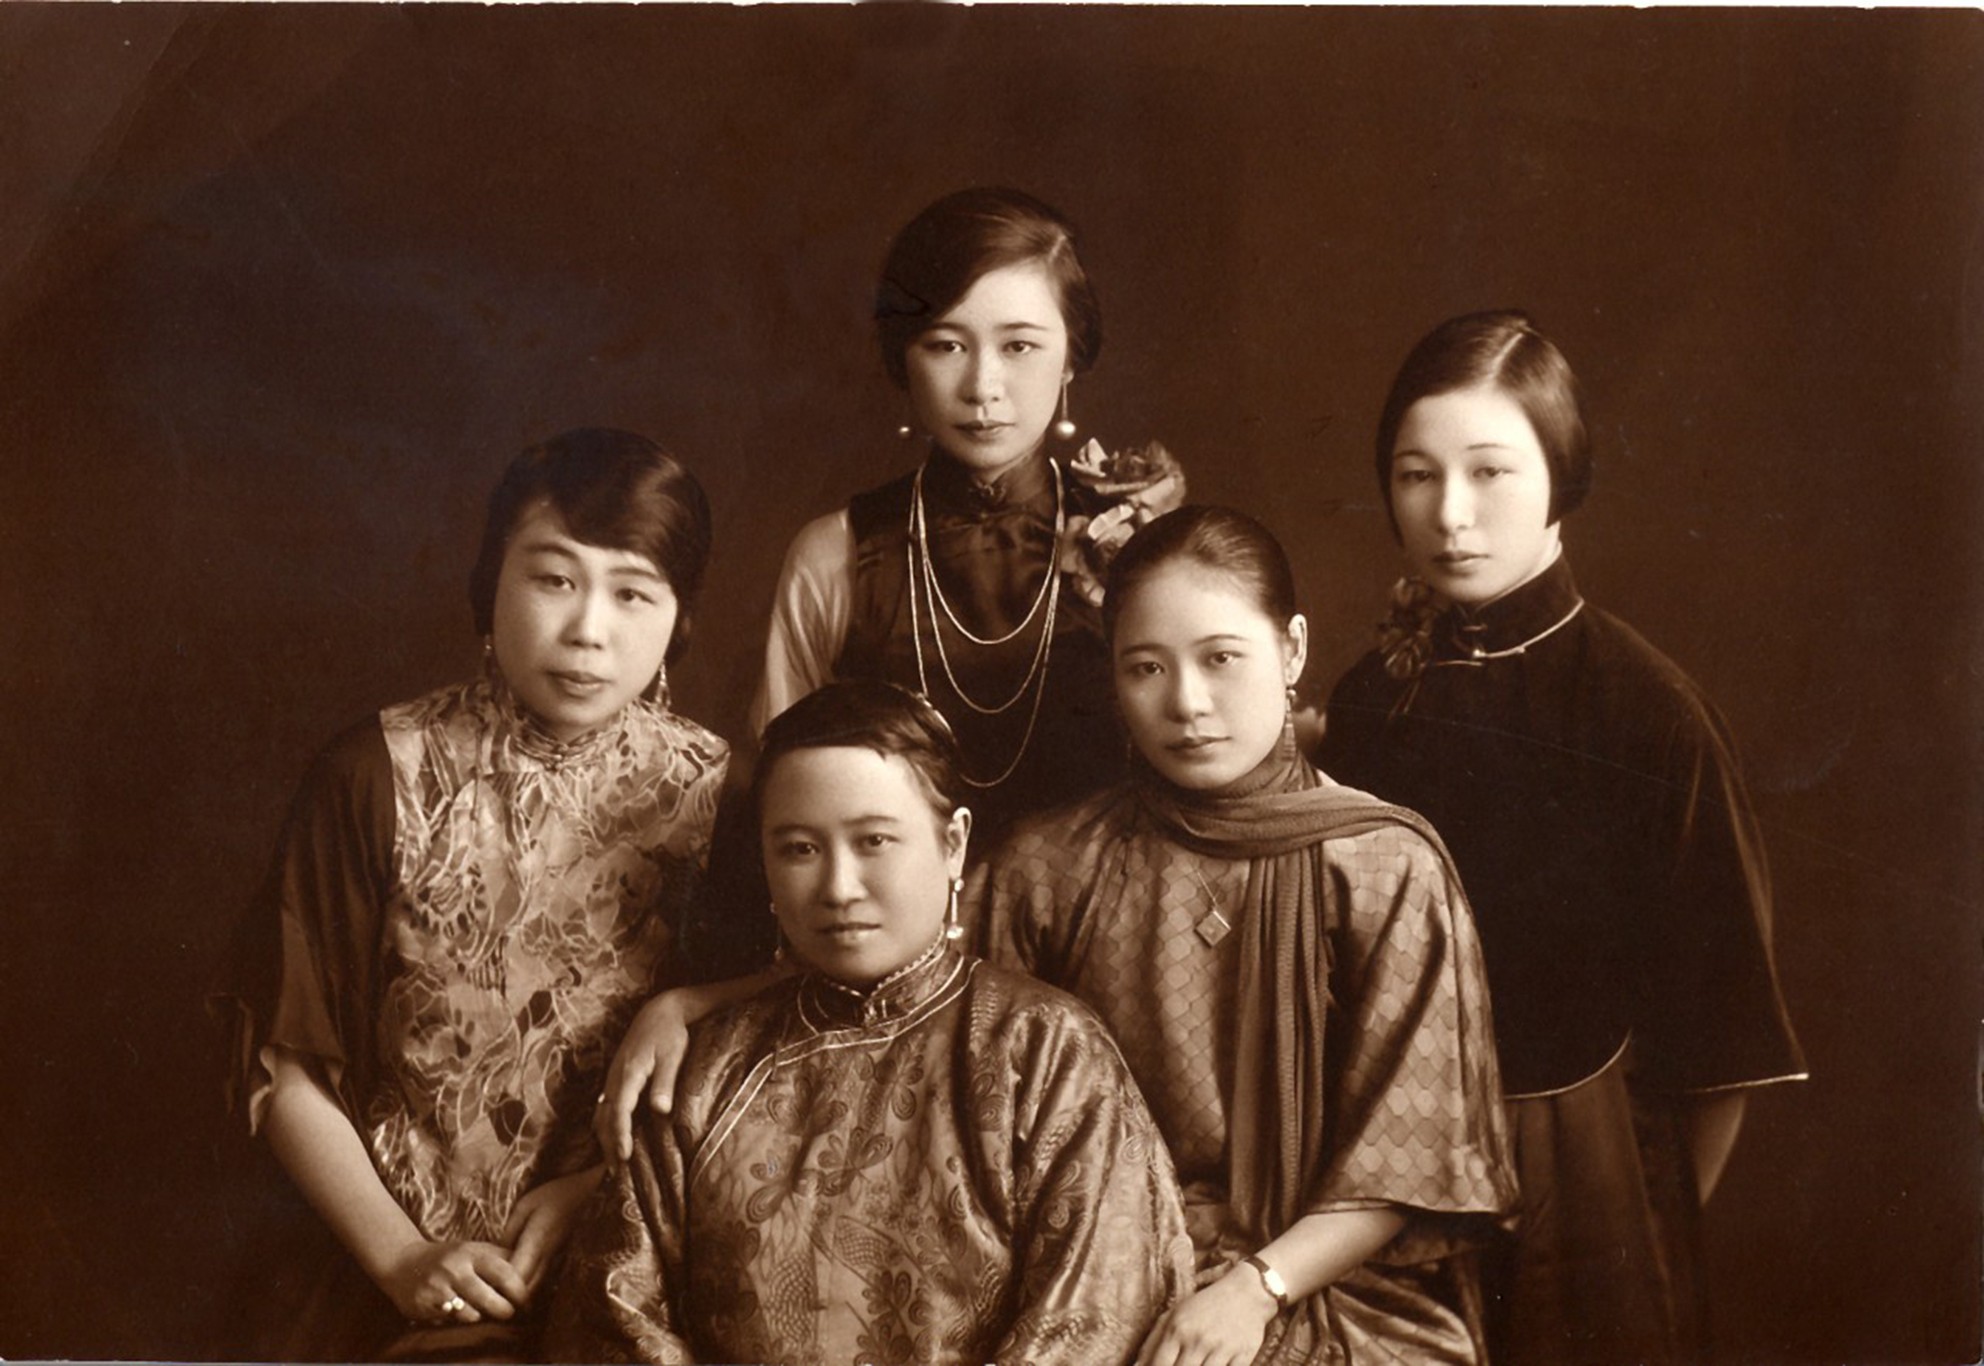 Members of the Wing On department store’s Kwok family in Shanghai in 1931: (clockwise from left) Edith Kwok, Elsie Kwok, Daisy Kwok, Pearlie Kwok and Darling Kwok. Daisy’s memoir, ‘Shanghai Daisy’, is one of two new memoirs recently released by Earnshaw Book. Photo: Private collection of Bobby Fu